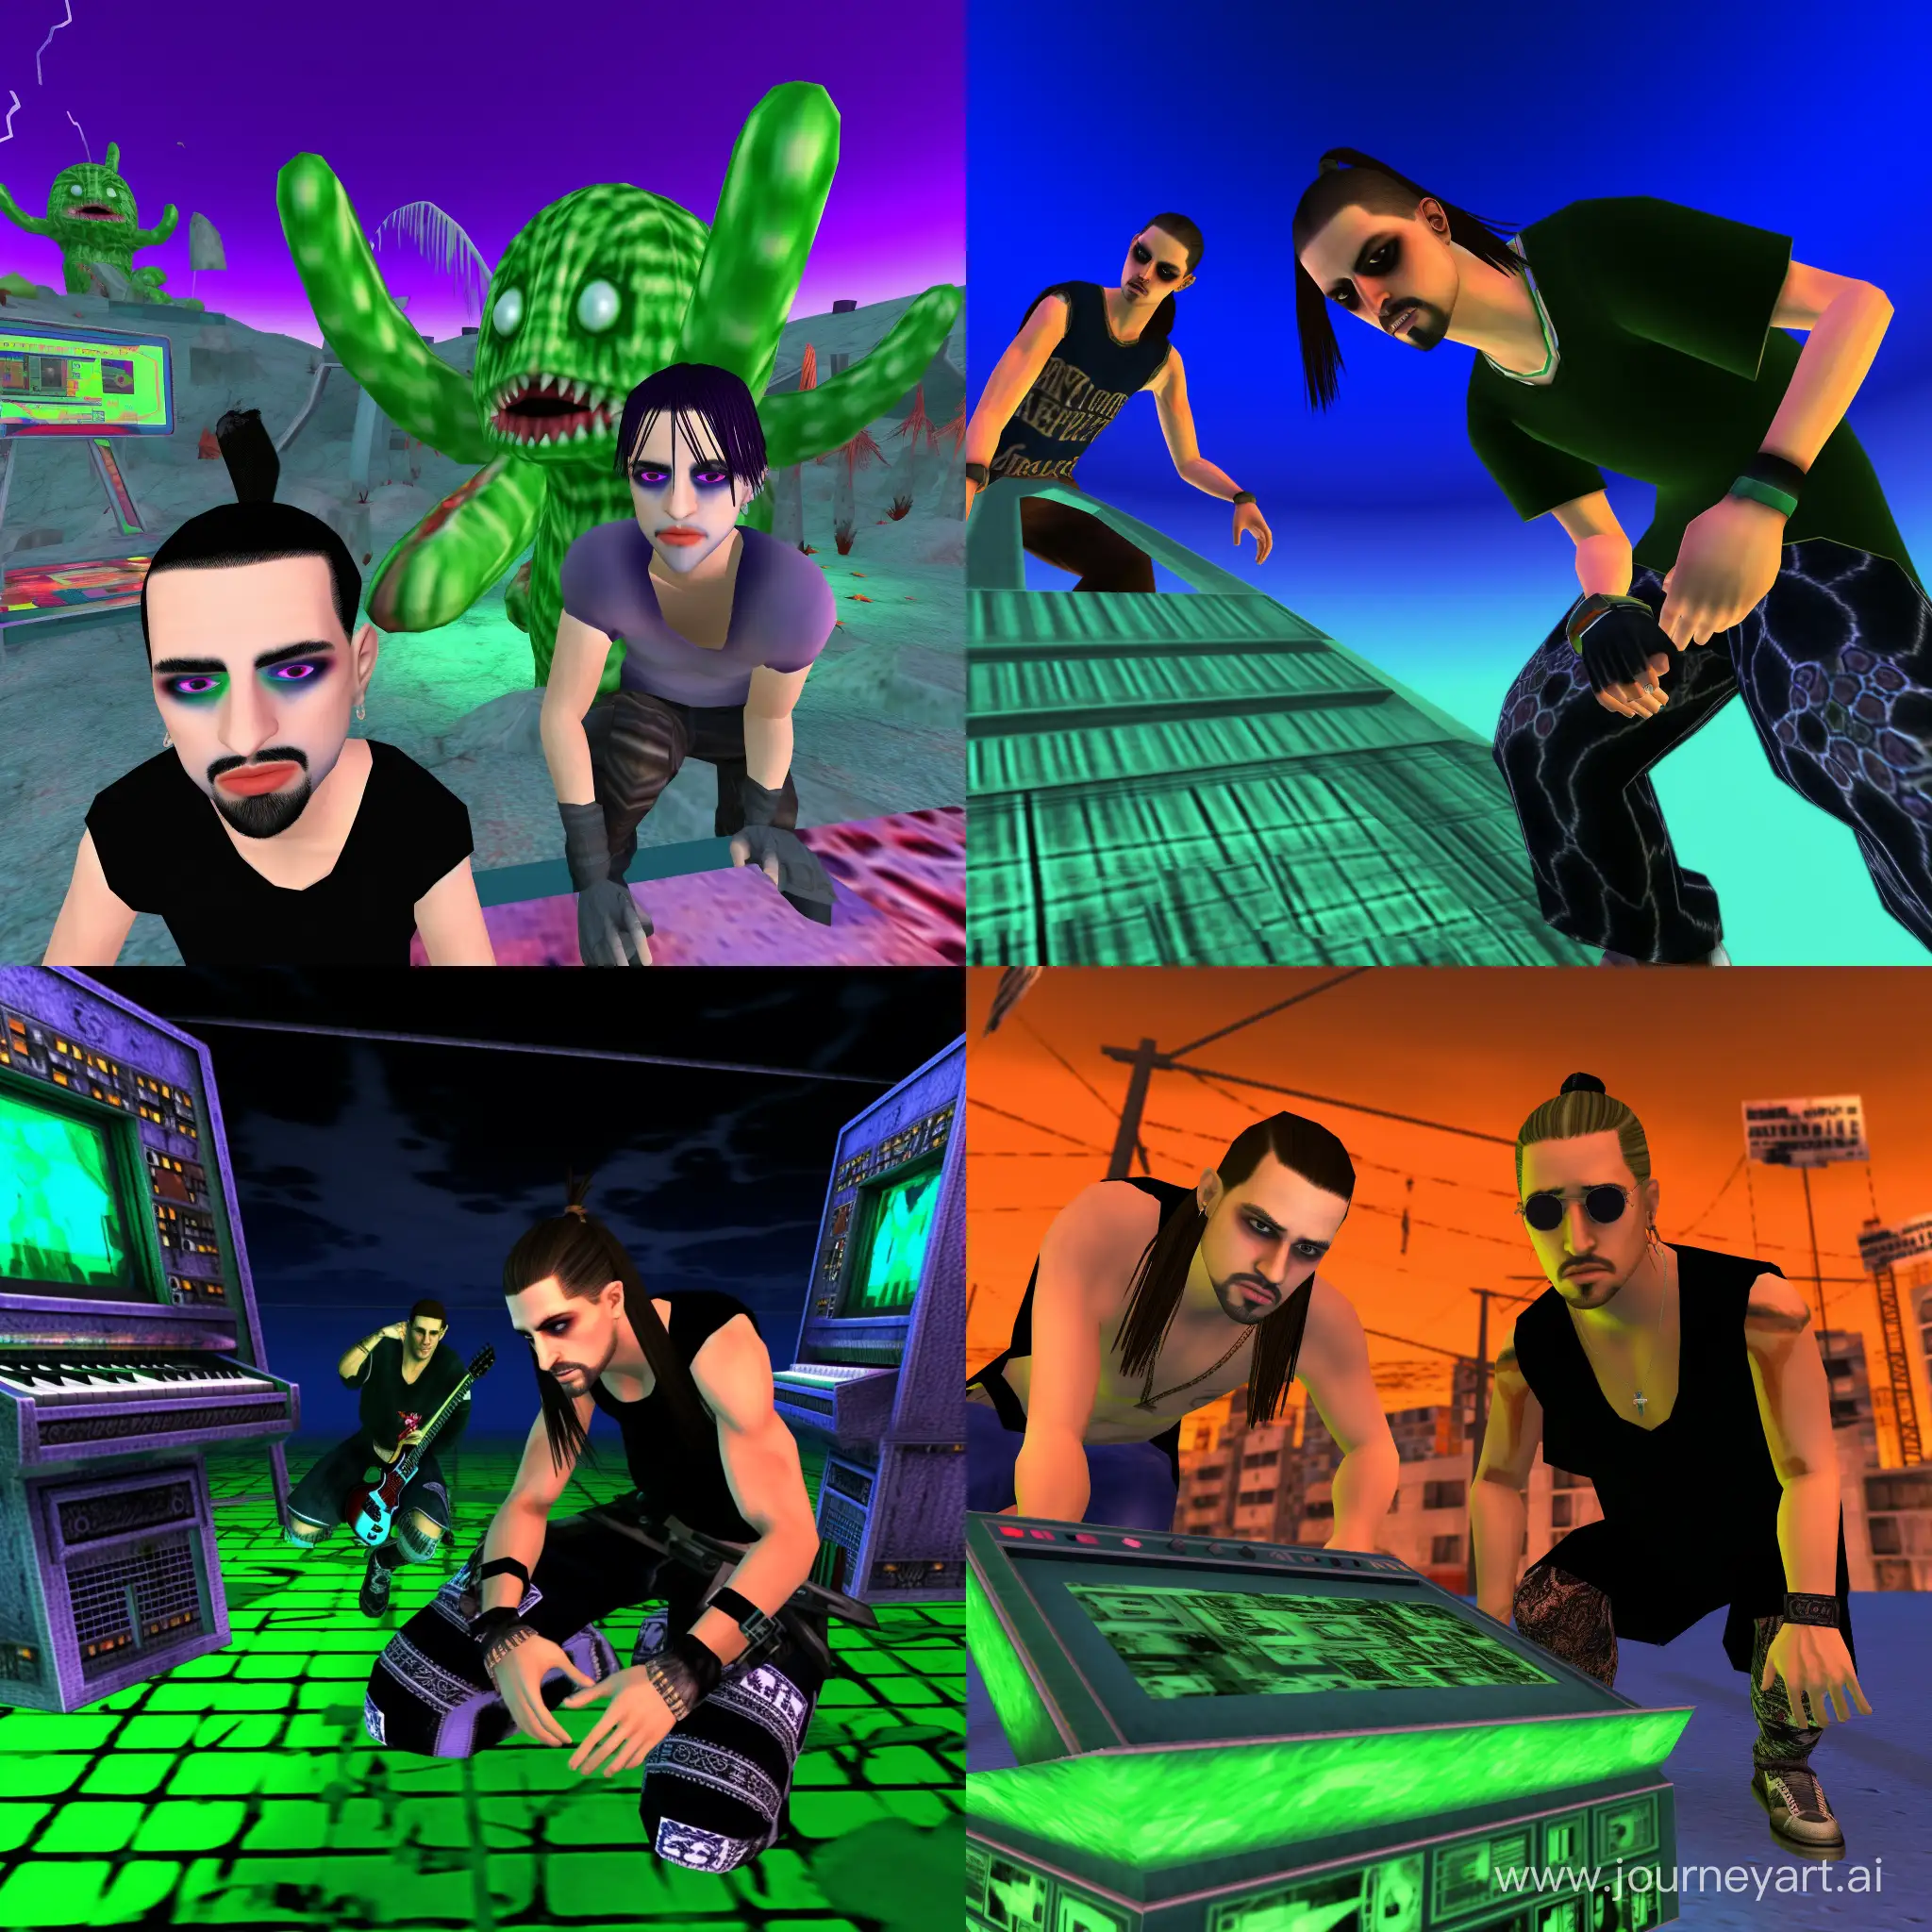 Pixelated-Glitch-Art-of-DJDuo-Dimitri-Vegas-and-Like-Mike-Playing-Radioactive-Dreams-Game